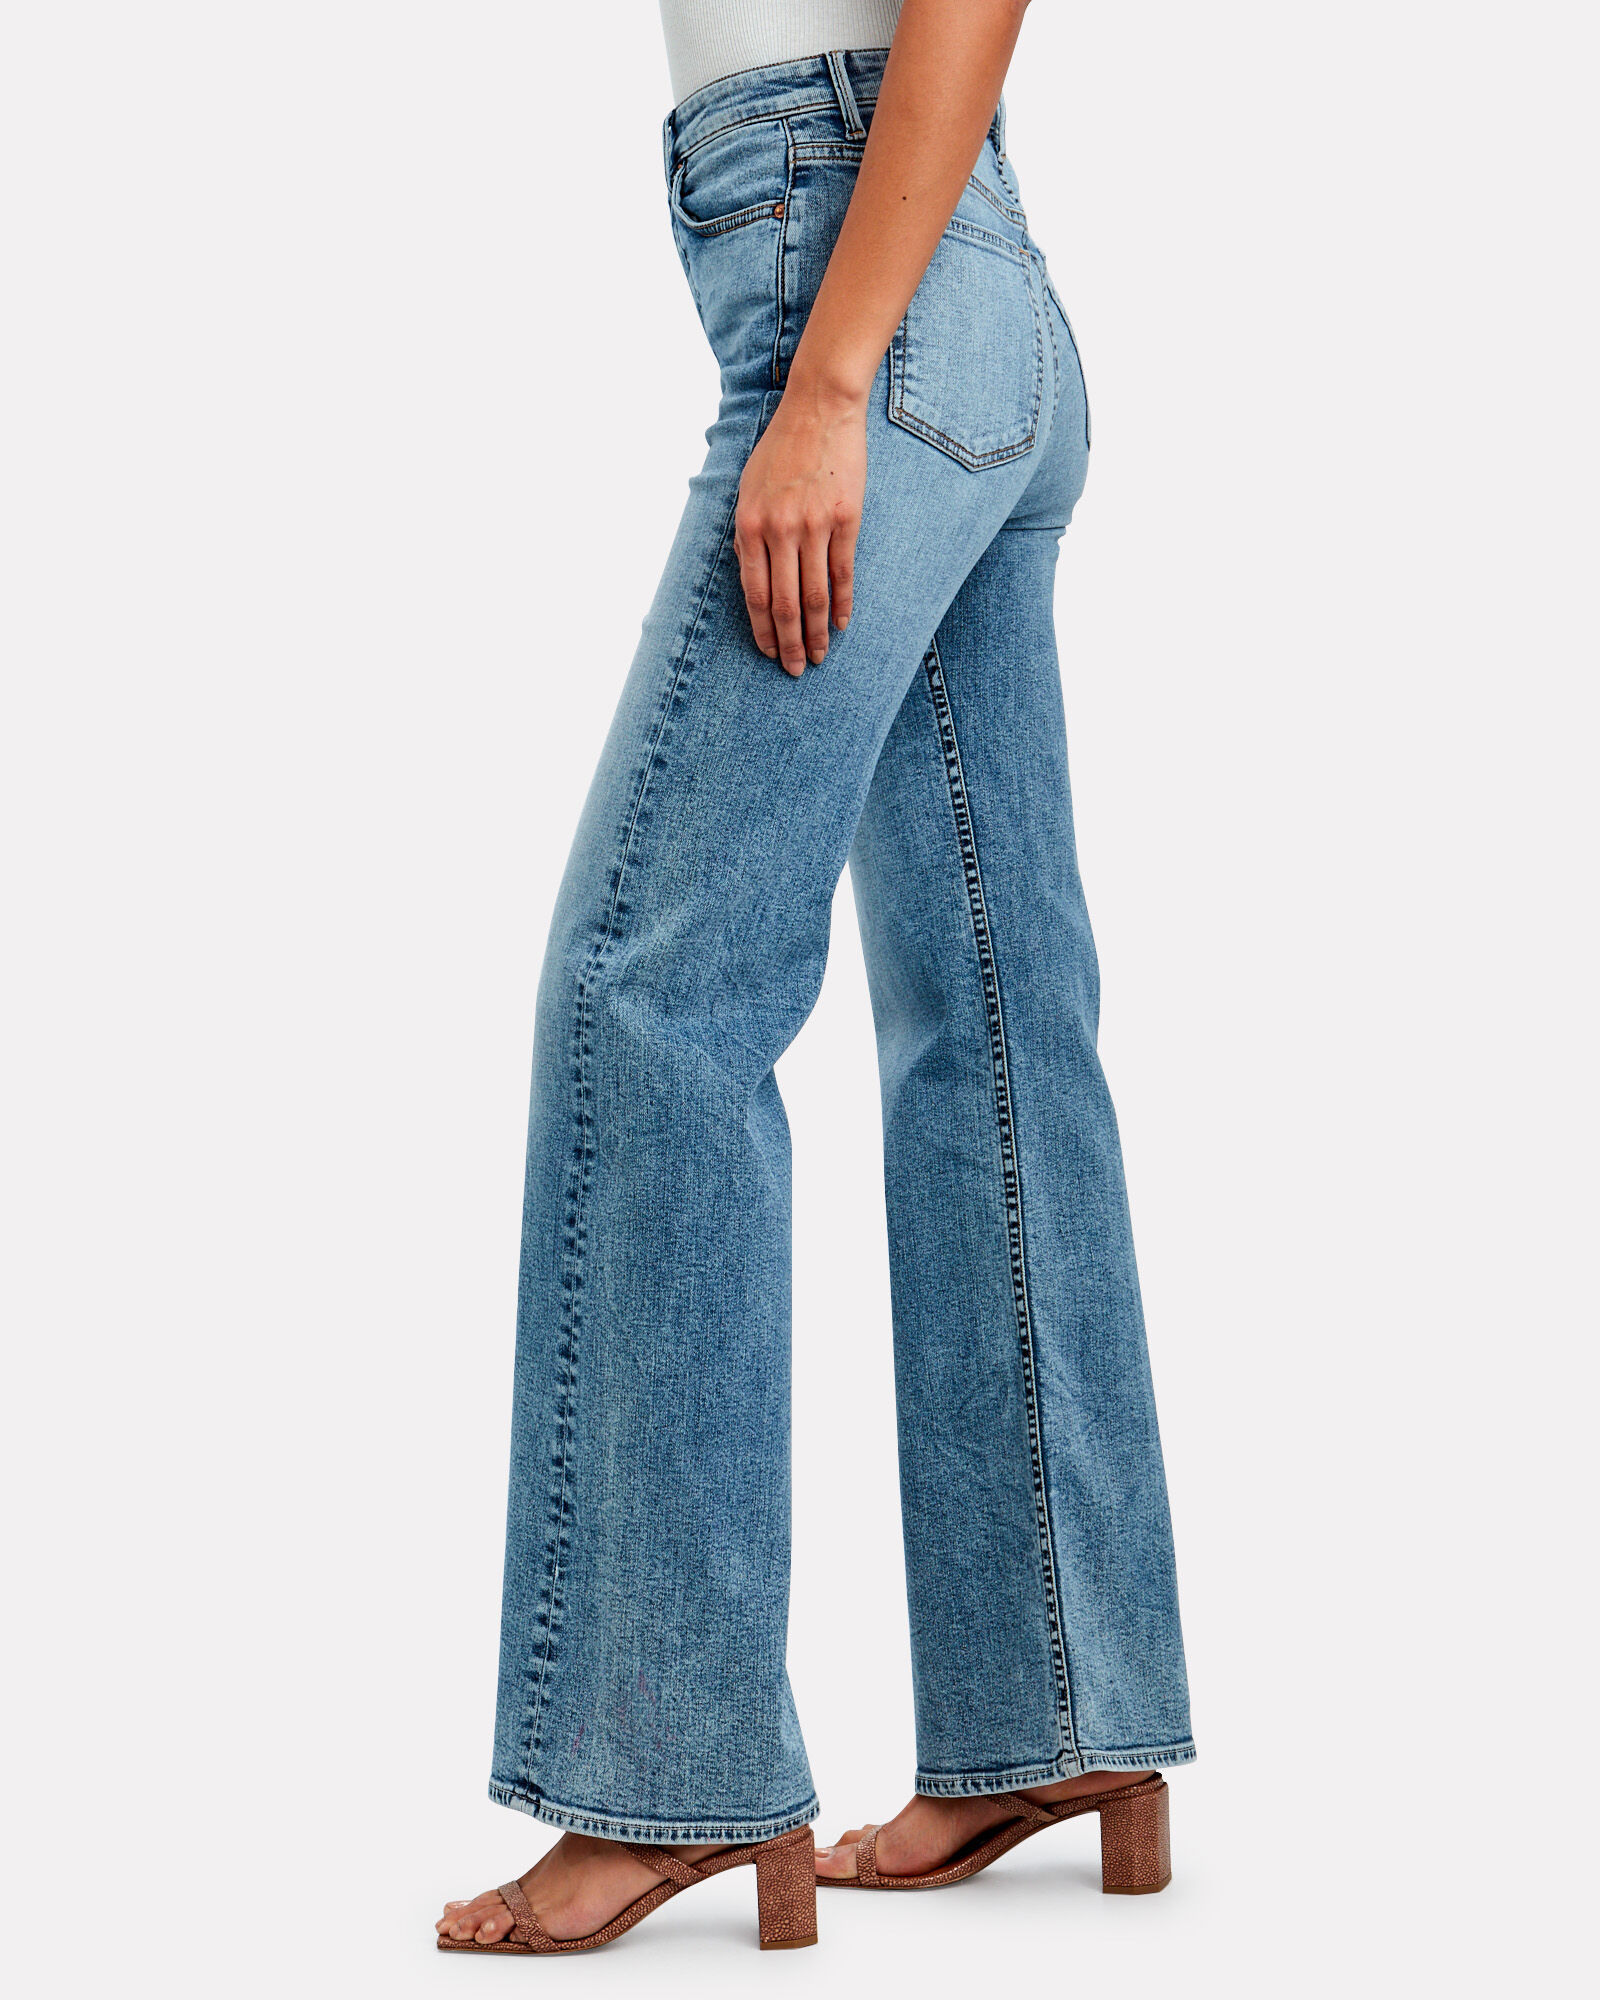 GRLFRND | Carla Got To Be Real Flared Jeans | INTERMIX®